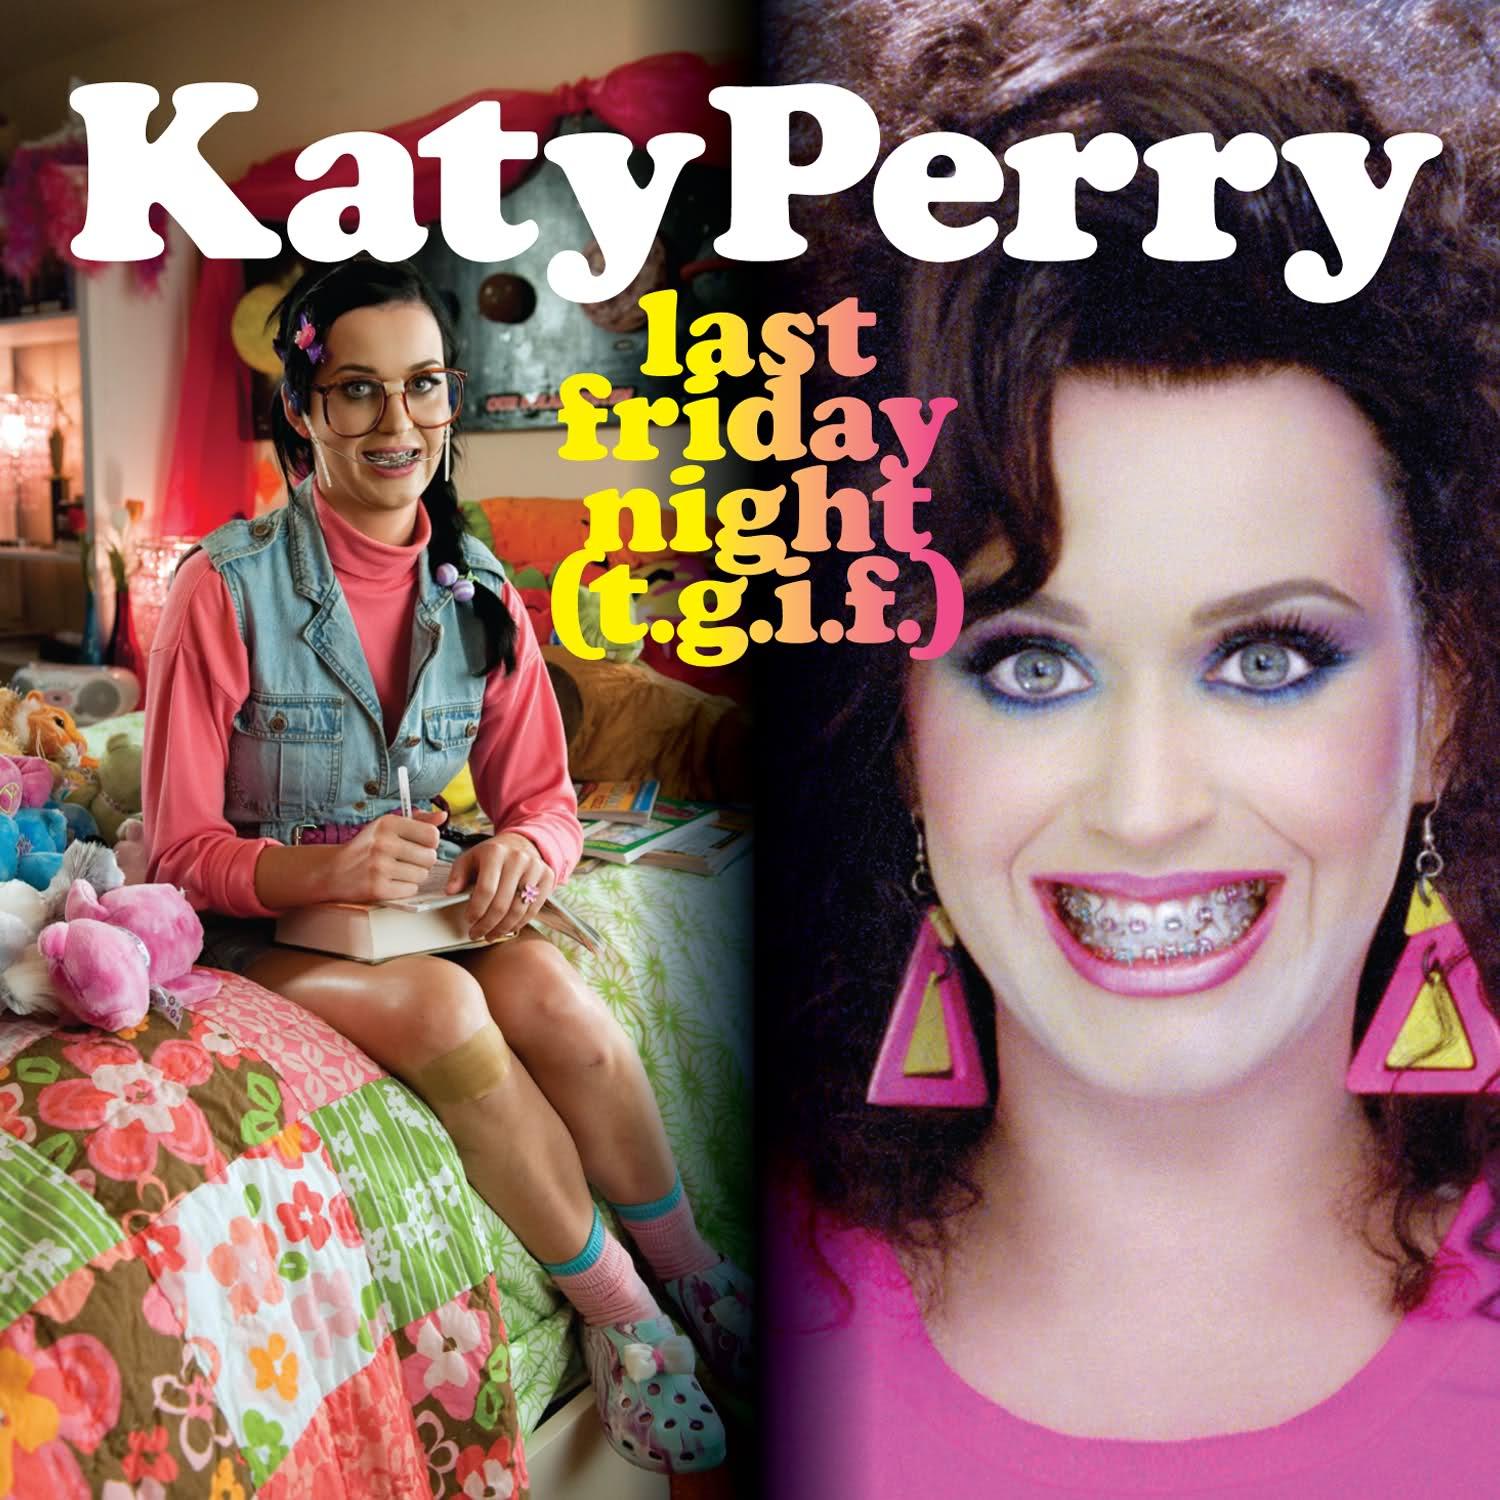 katy perry conectar albums wikipedia